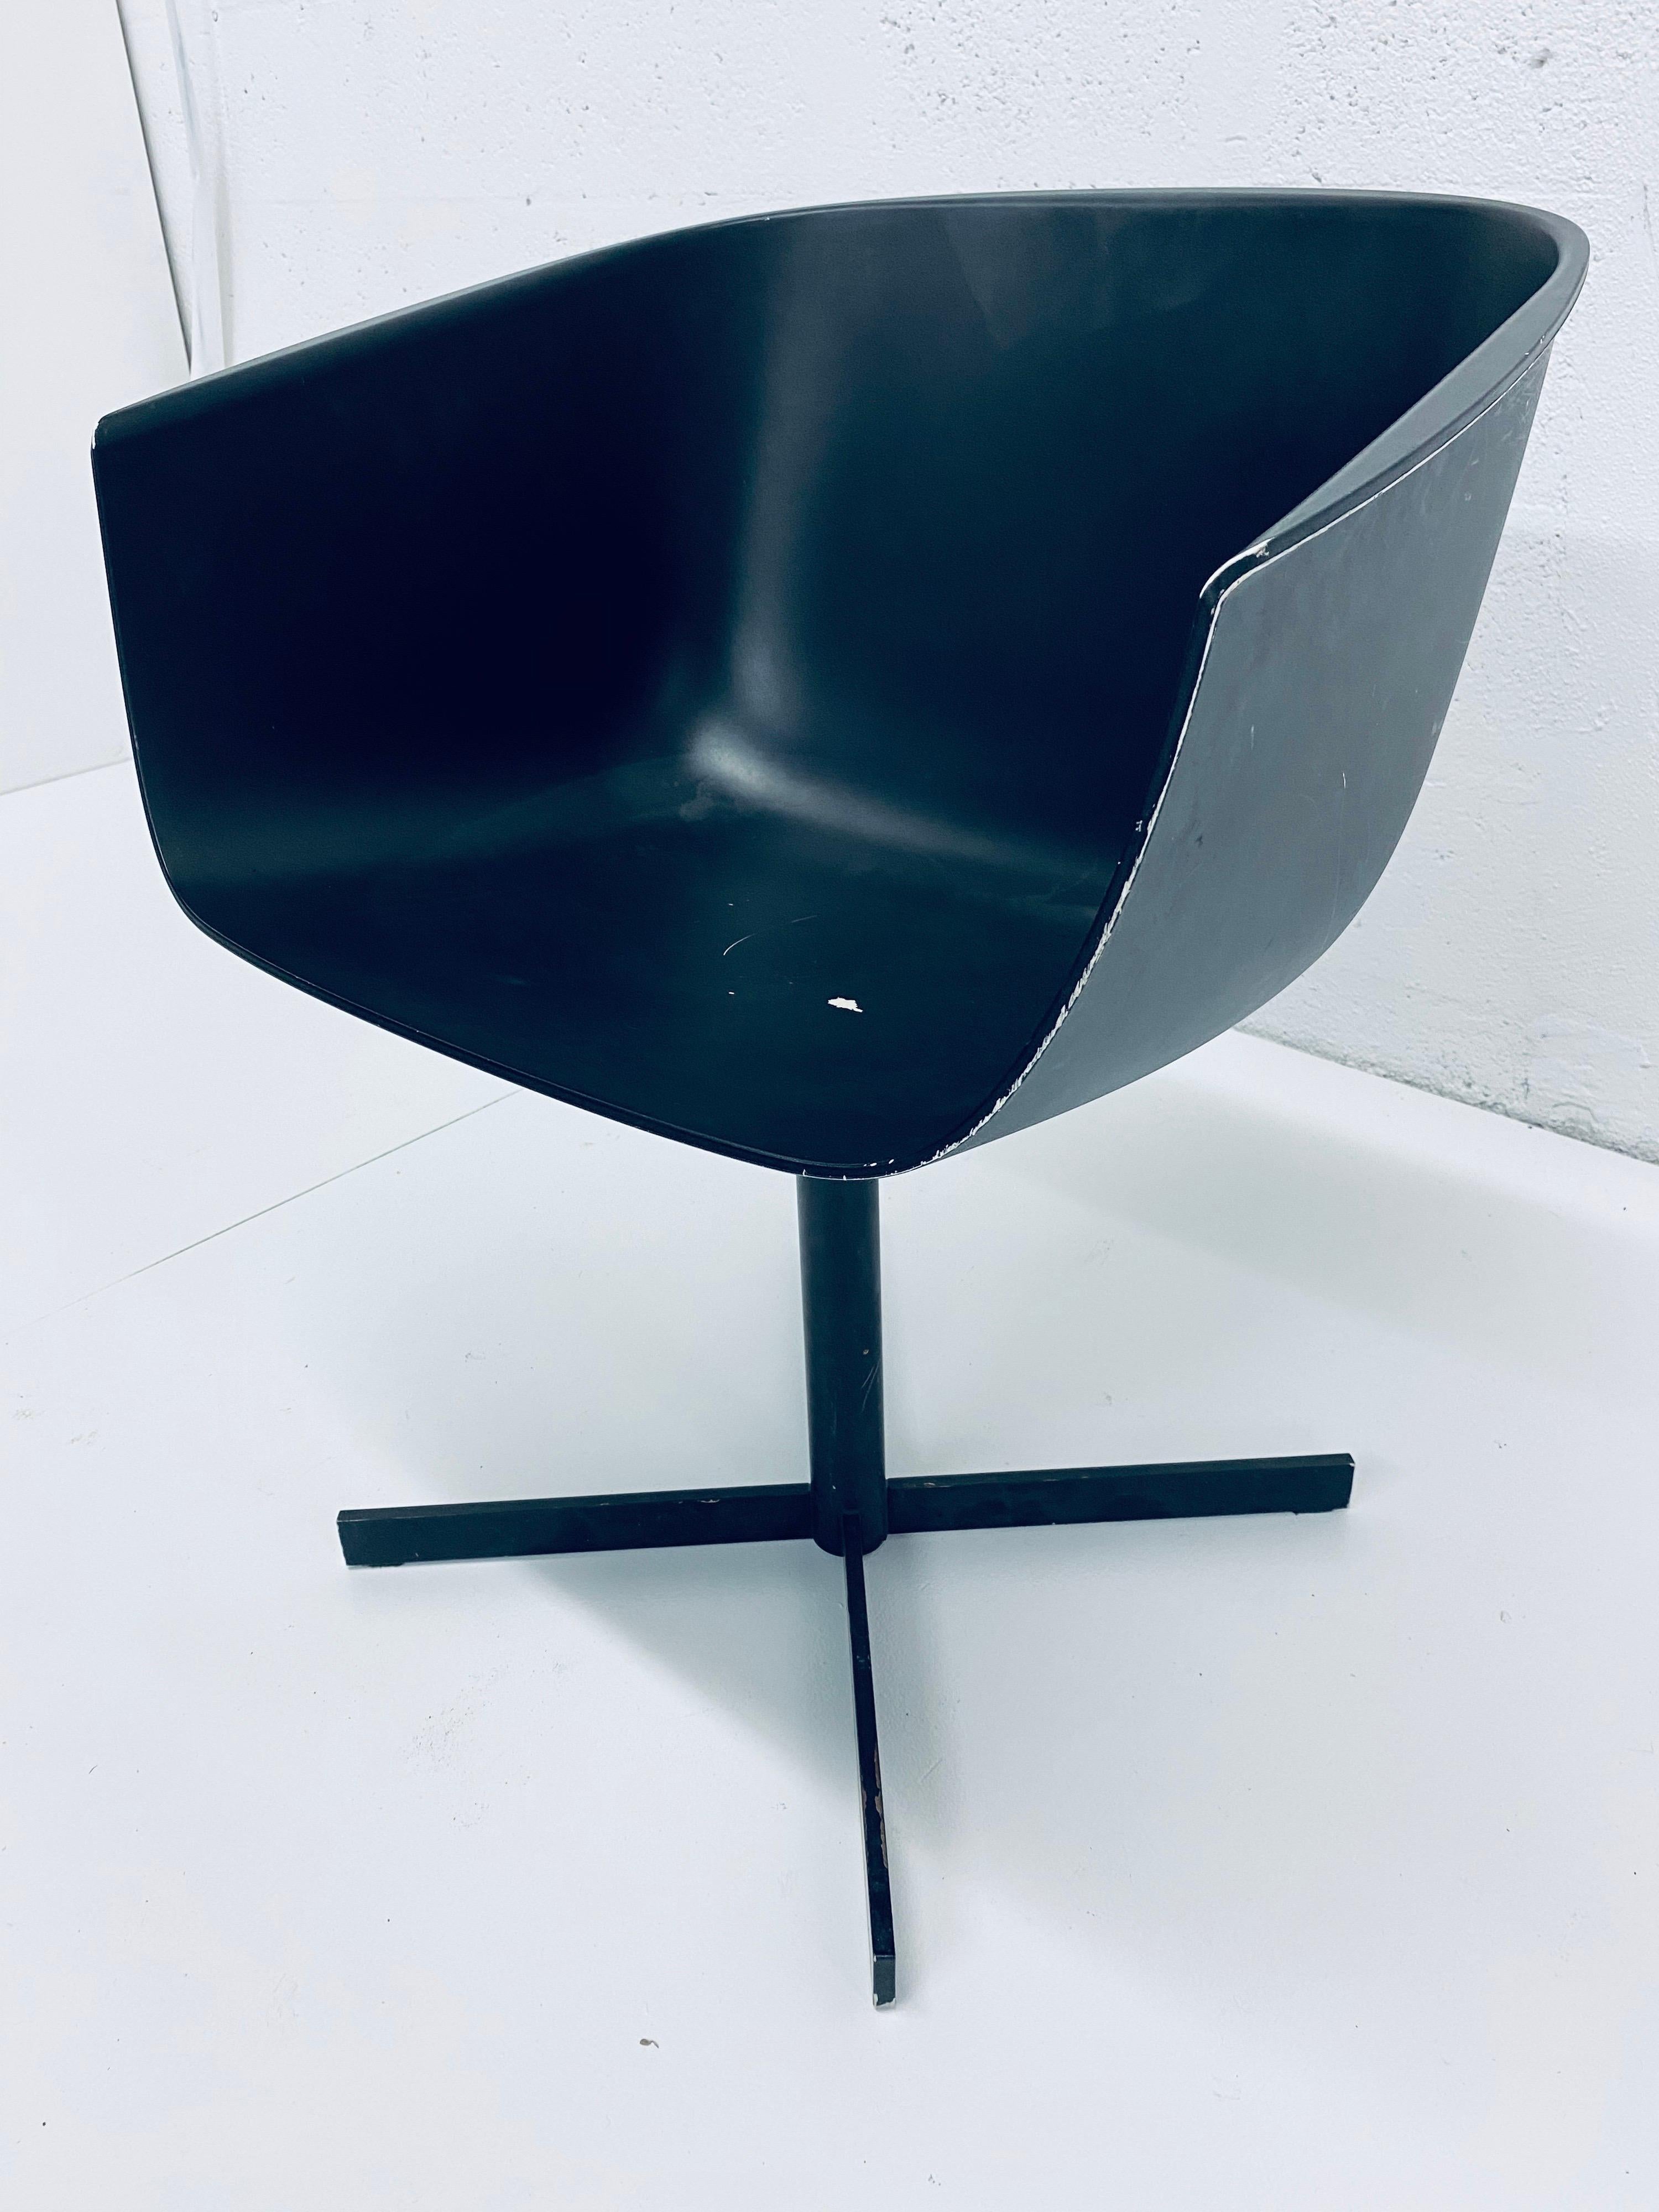 Carlo Colombo designed strip chair made of moulded plastic seat and steel swivel frame for Poliform. Chair is distressed from age and use.